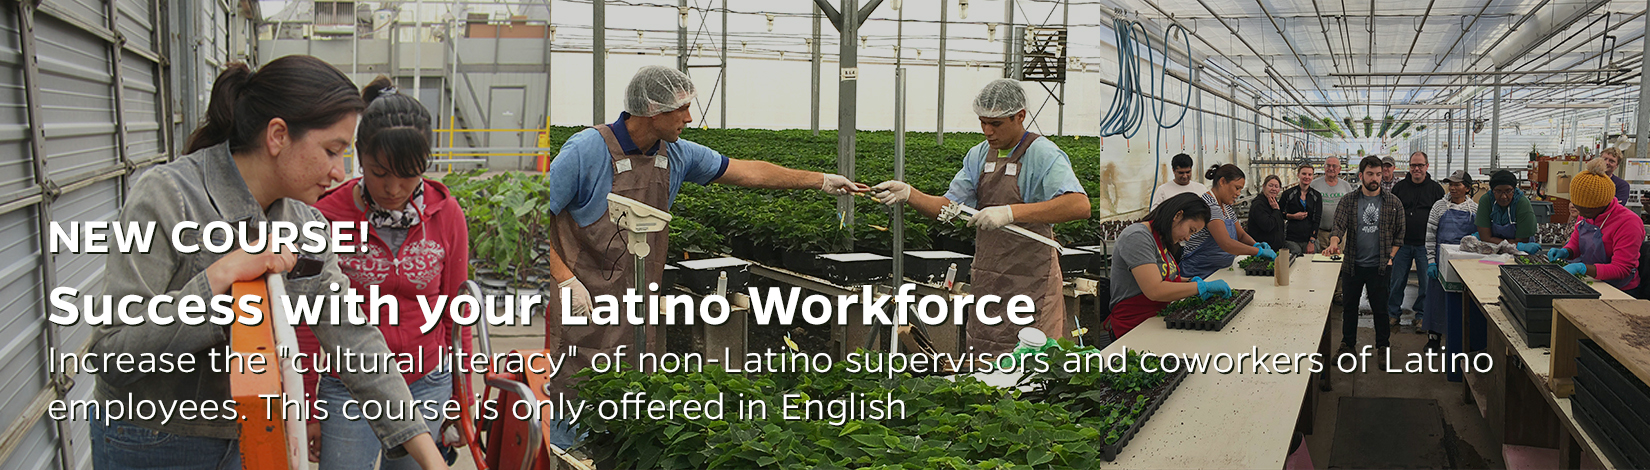 NEW COURSE! Success with your Latino Workforce: Increase the 